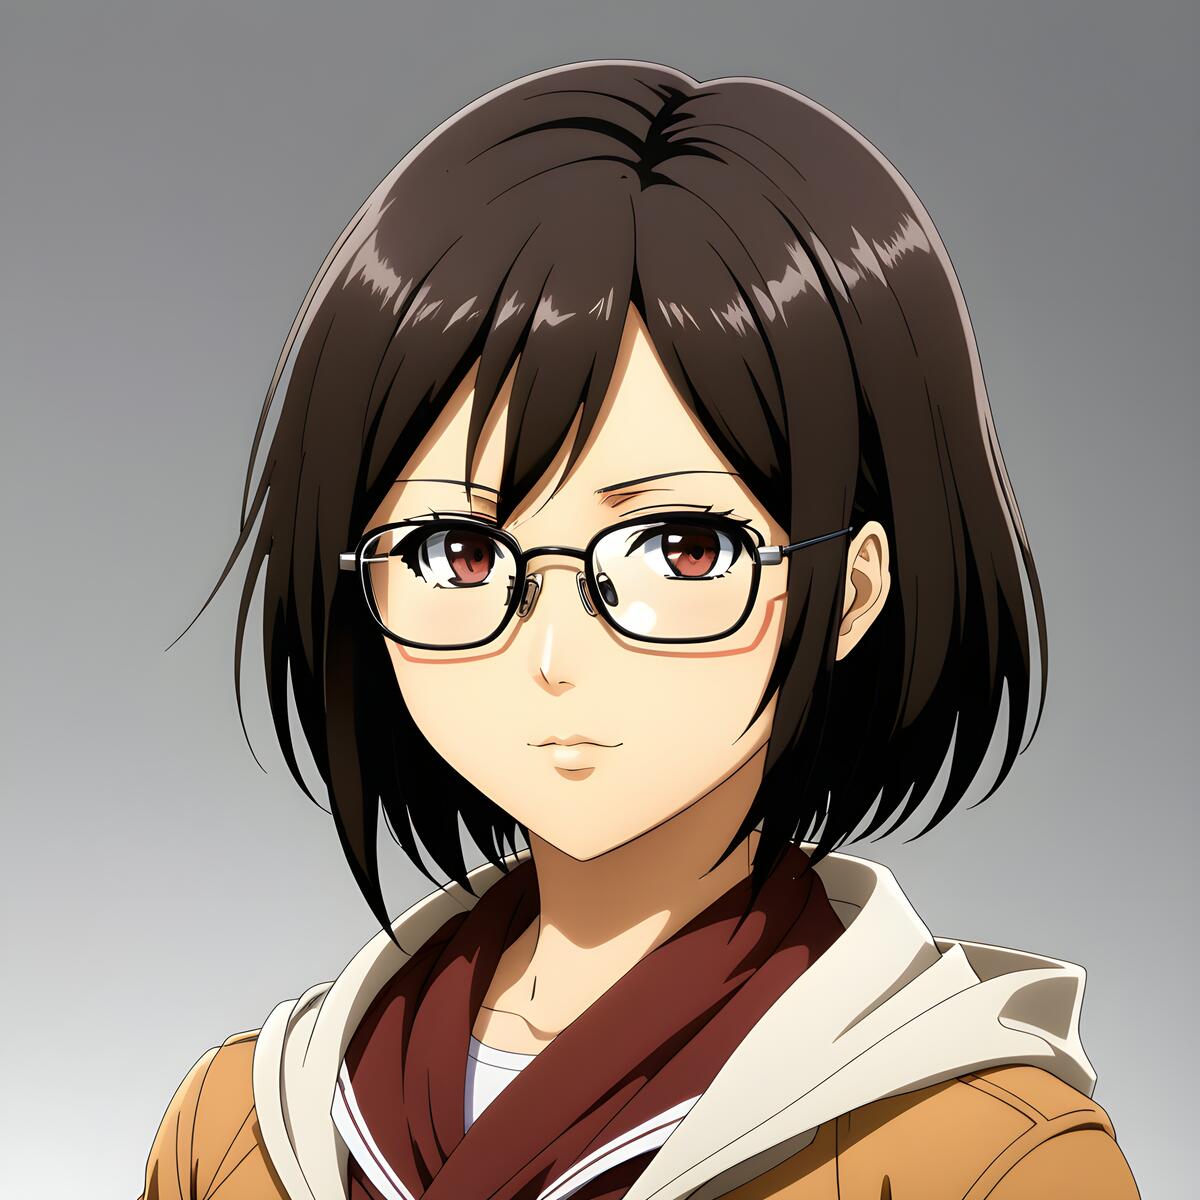 Mikasa with glasses